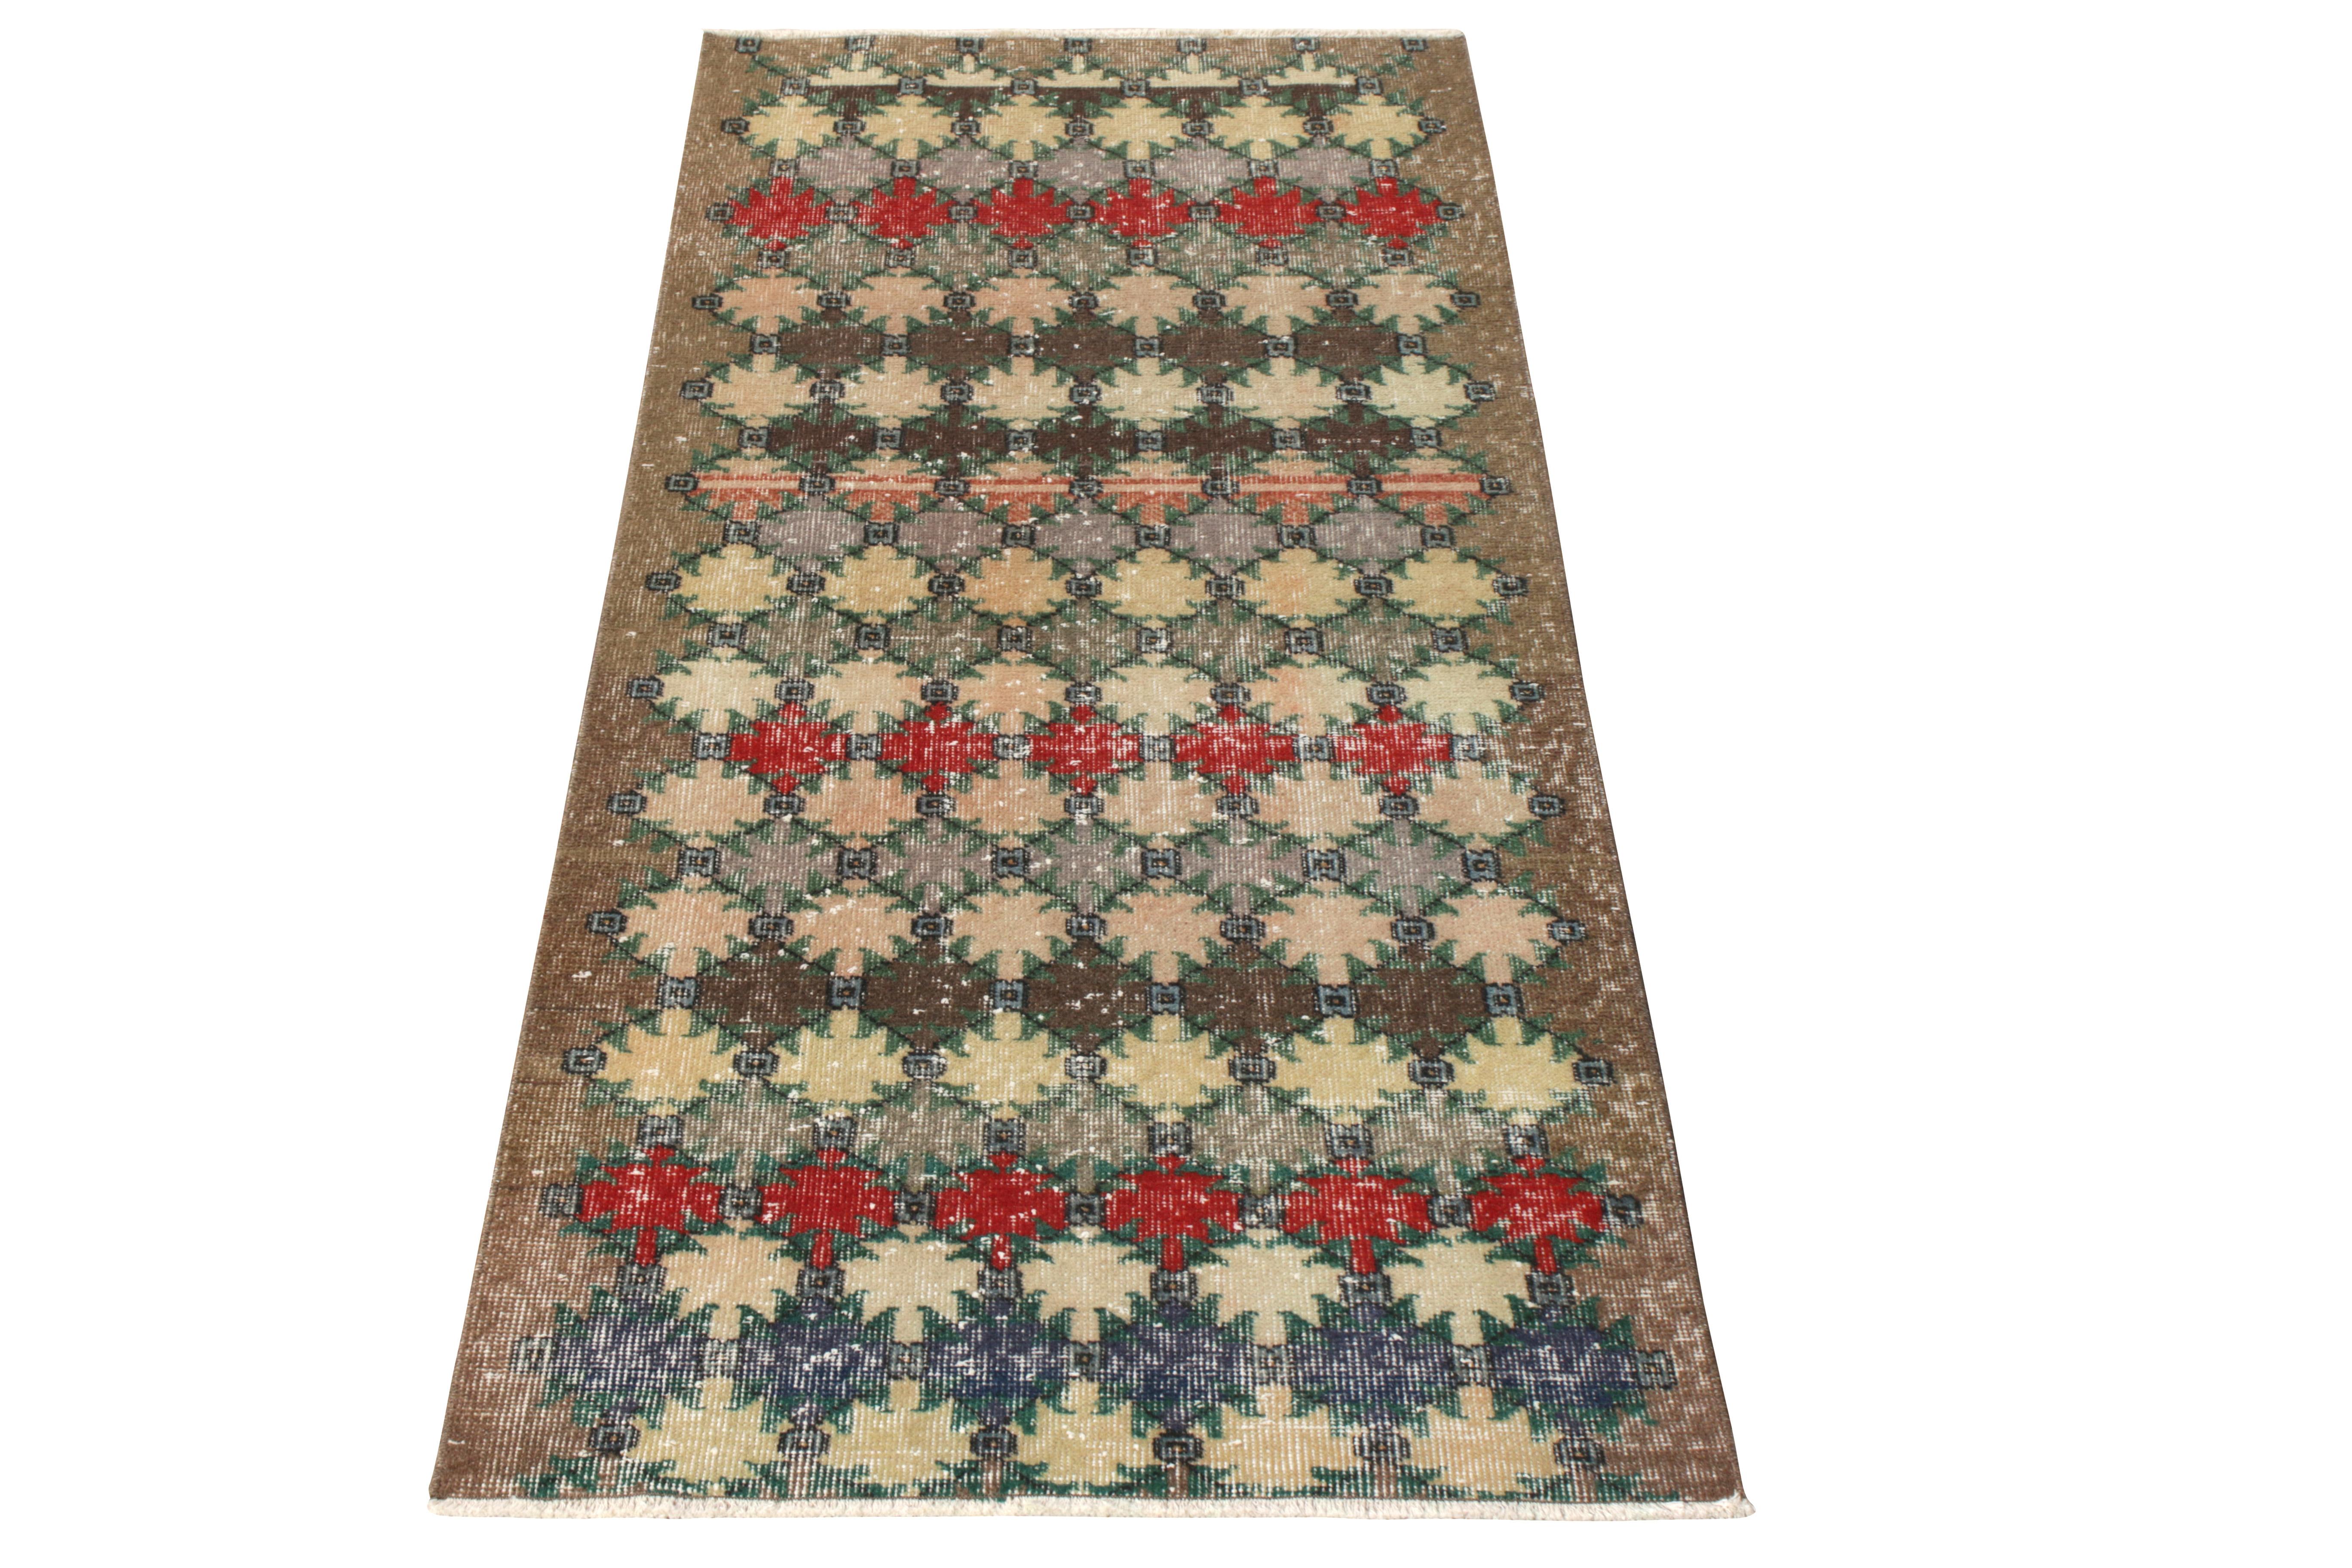 Hand-knotted in wool originating from Turkey circa 1960-1970, this vintage mid-century 3x6 runner belongs to Rug & Kilim’s expansive Mid-Century Pasha collection—celebrating the Turkish icon and multidisciplinary designer Zeki Müren’s works from